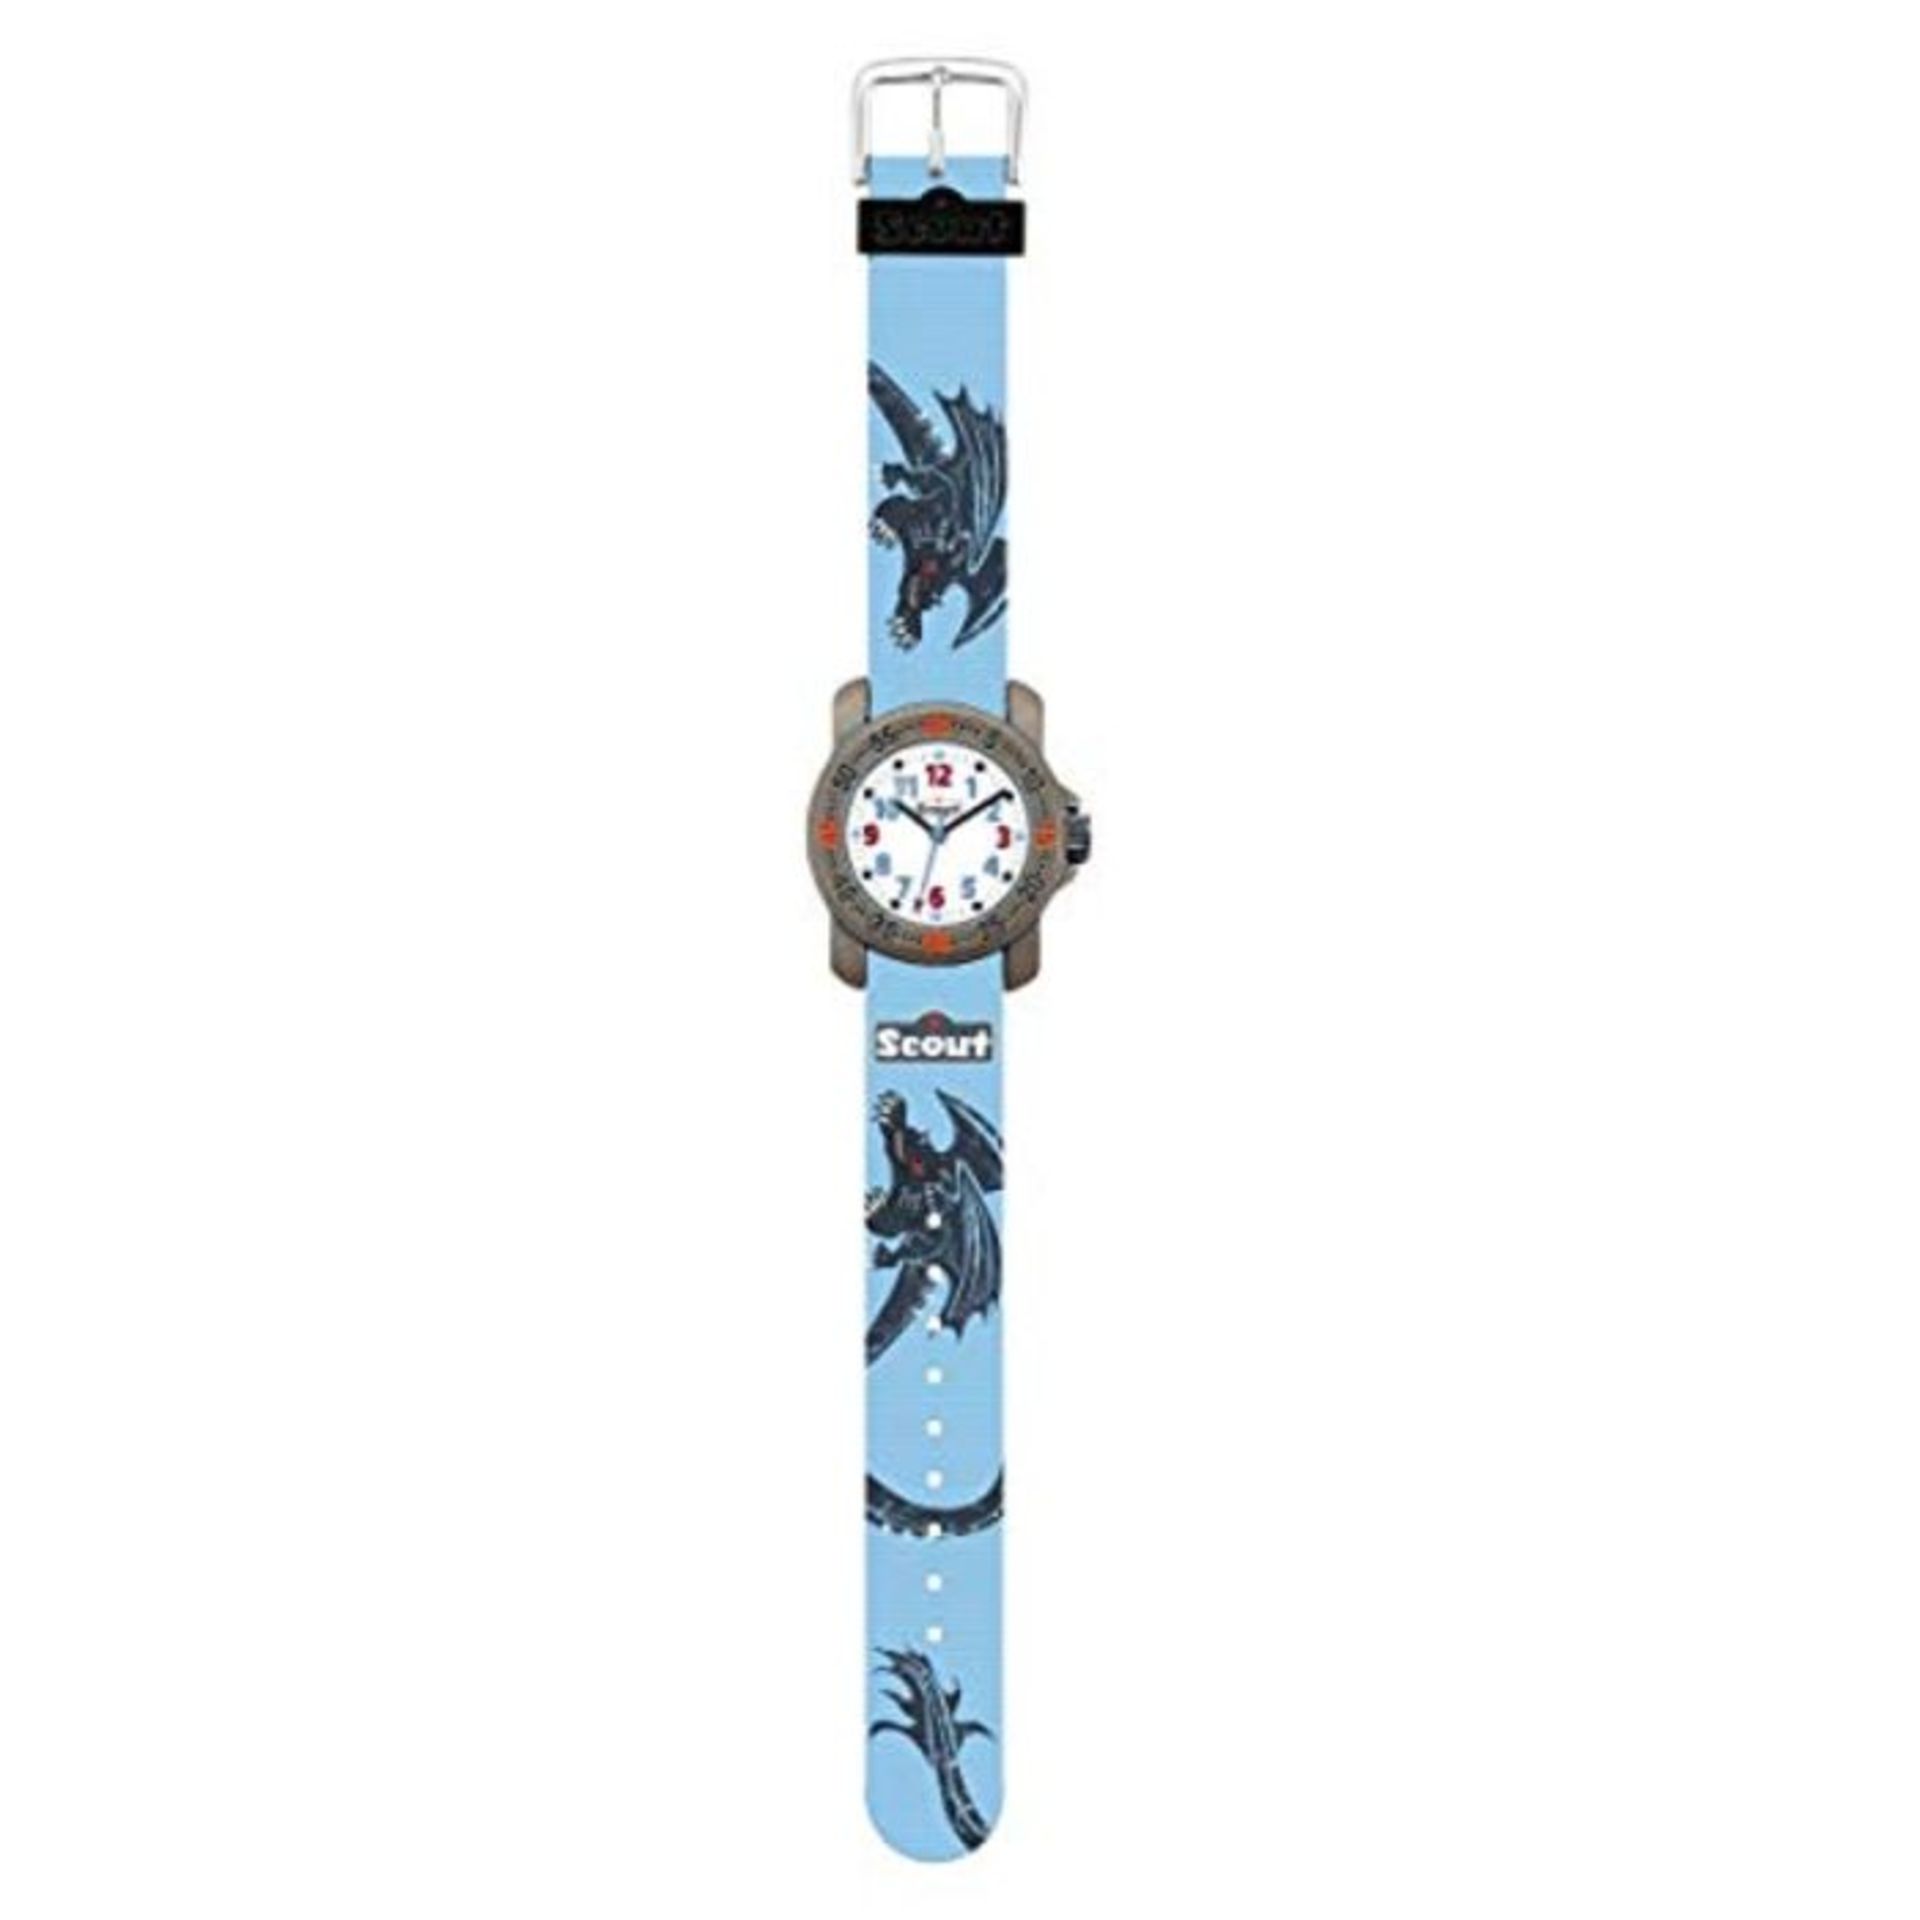 Scout Boy's Analogue Quartz Watch with Fabric Band Strap 1